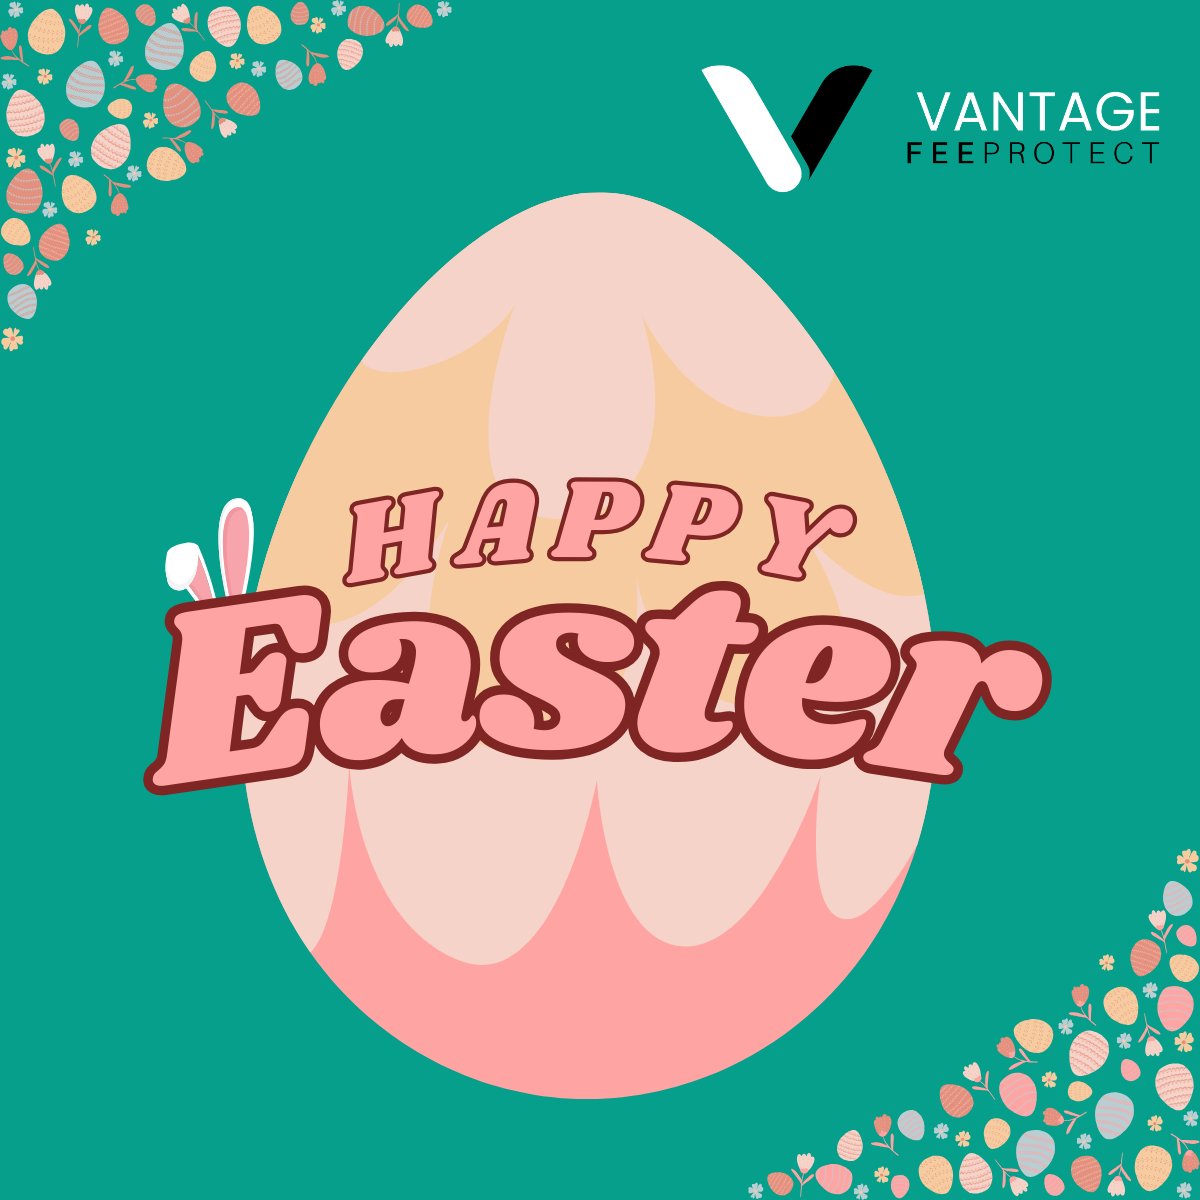 Easter Wishes from #TeamVantage! Wishing you all a wonderful holiday filled with love and happiness! #VantageFeeProtect #EasterHoliday  🐰🌻